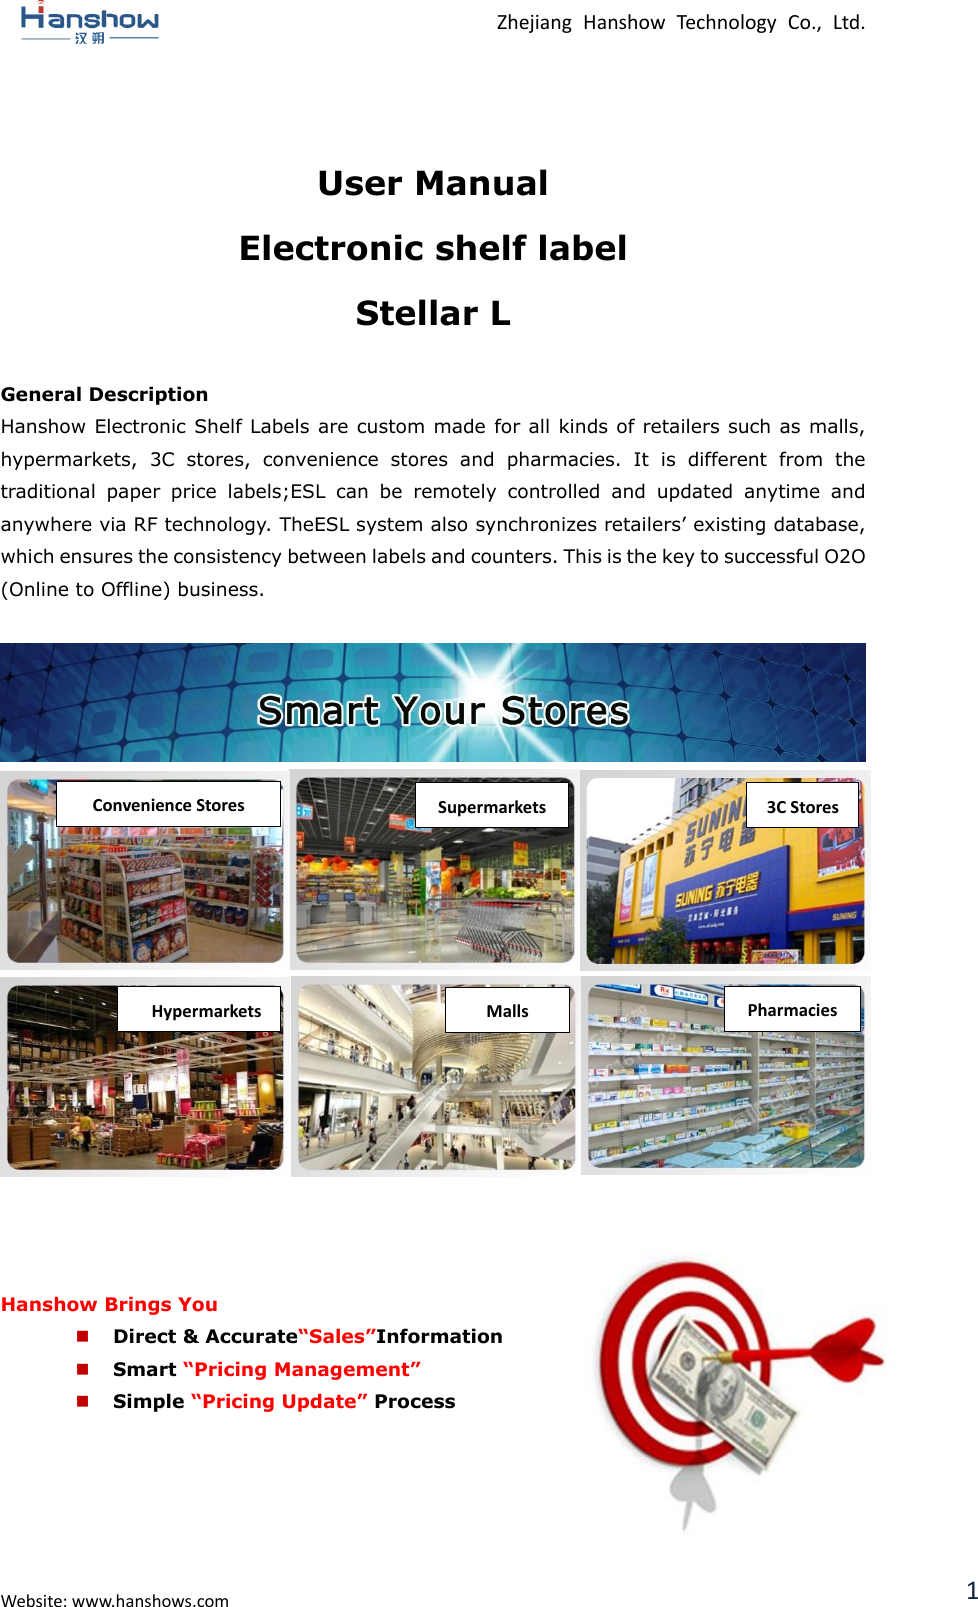  Zhejiang  Hanshow  Technology  Co.,  Ltd.   Website: www.hanshows.com 1  User Manual Electronic shelf label Stellar L  General Description Hanshow Electronic Shelf Labels are custom made for all kinds of retailers such as malls, hypermarkets,  3C  stores,  convenience  stores  and  pharmacies.  It  is  different  from  the traditional  paper  price  labels;ESL  can  be  remotely  controlled  and  updated  anytime  and anywhere via RF technology. TheESL system also synchronizes retailers’ existing database, which ensures the consistency between labels and counters. This is the key to successful O2O (Online to Offline) business.                     Hanshow Brings You  Direct &amp; Accurate“Sales”Information  Smart “Pricing Management”  Simple “Pricing Update” Process      Convenience Stores Supermarkets 3C Stores Pharmacies Malls Hypermarkets G-MALL 